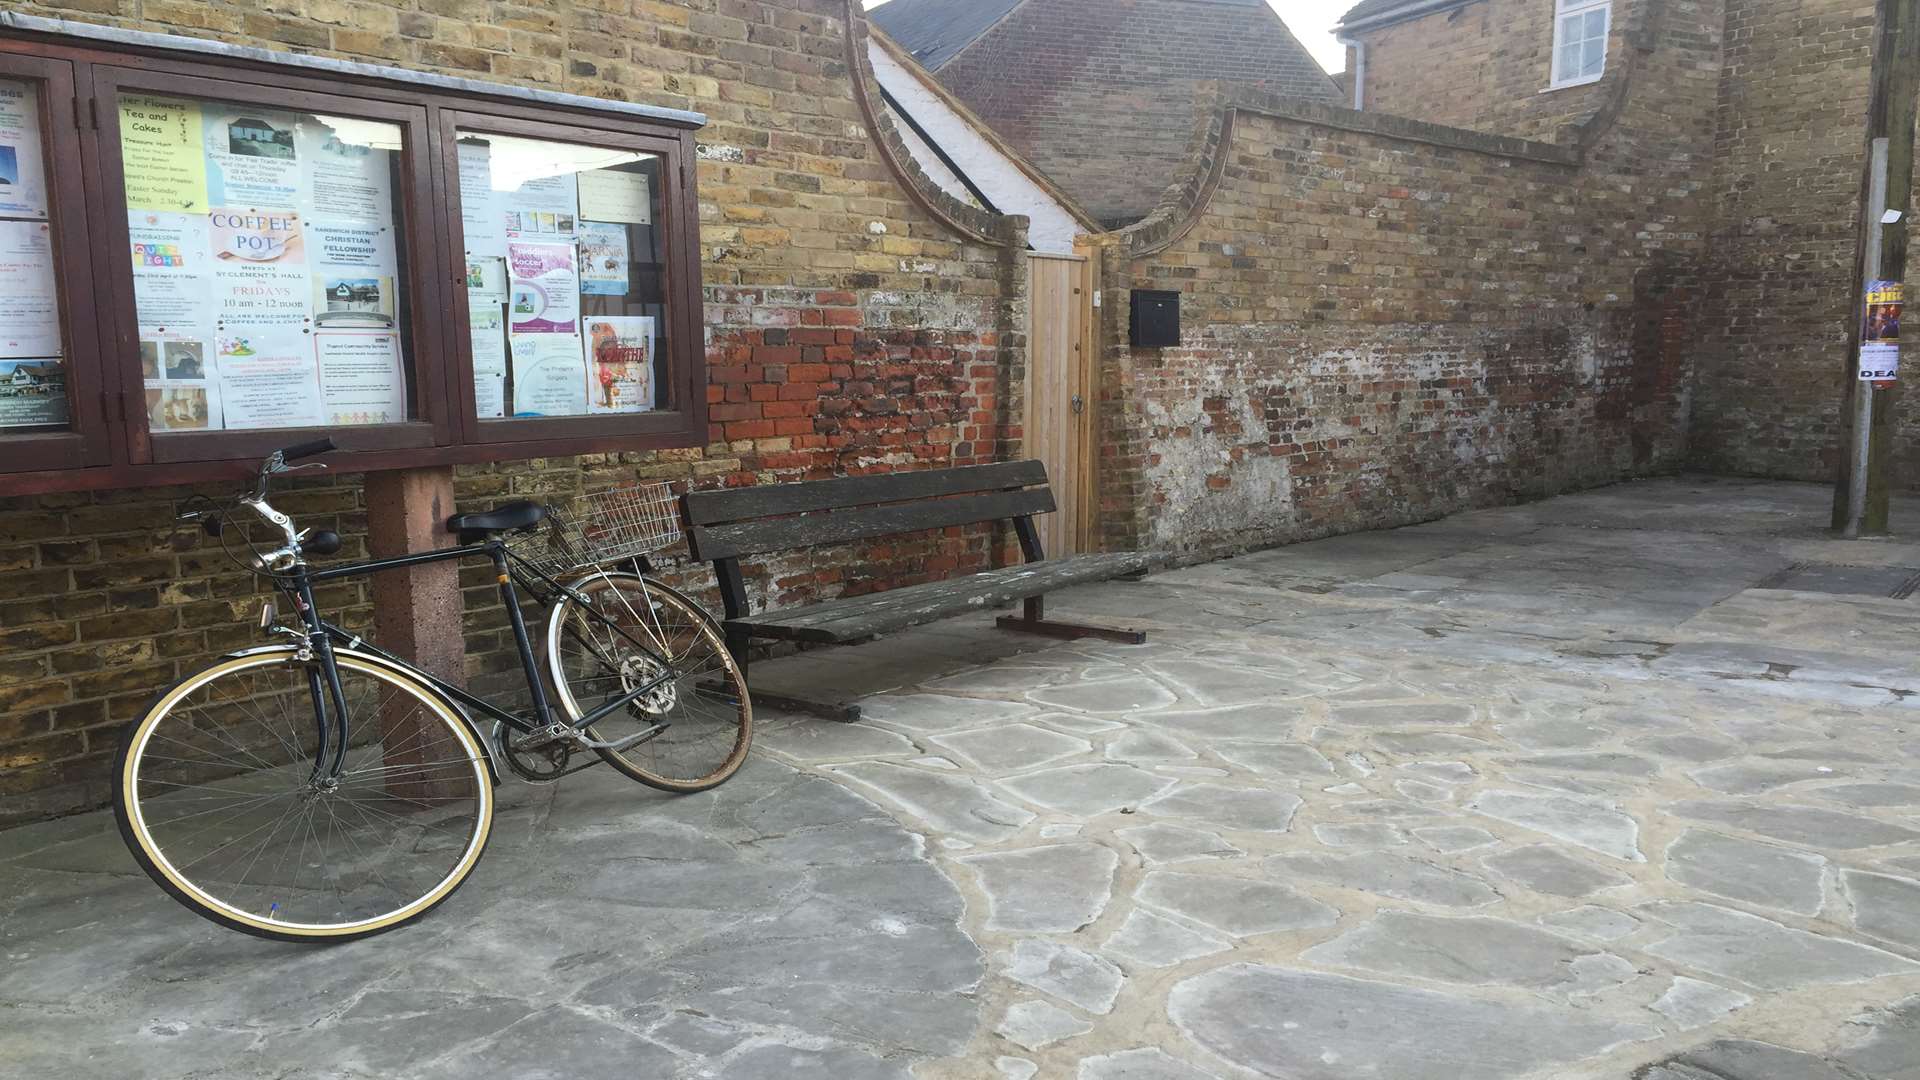 Dover District Council has removed three well-used cycle racks in Sandwich however bikes are still finding a way to park there